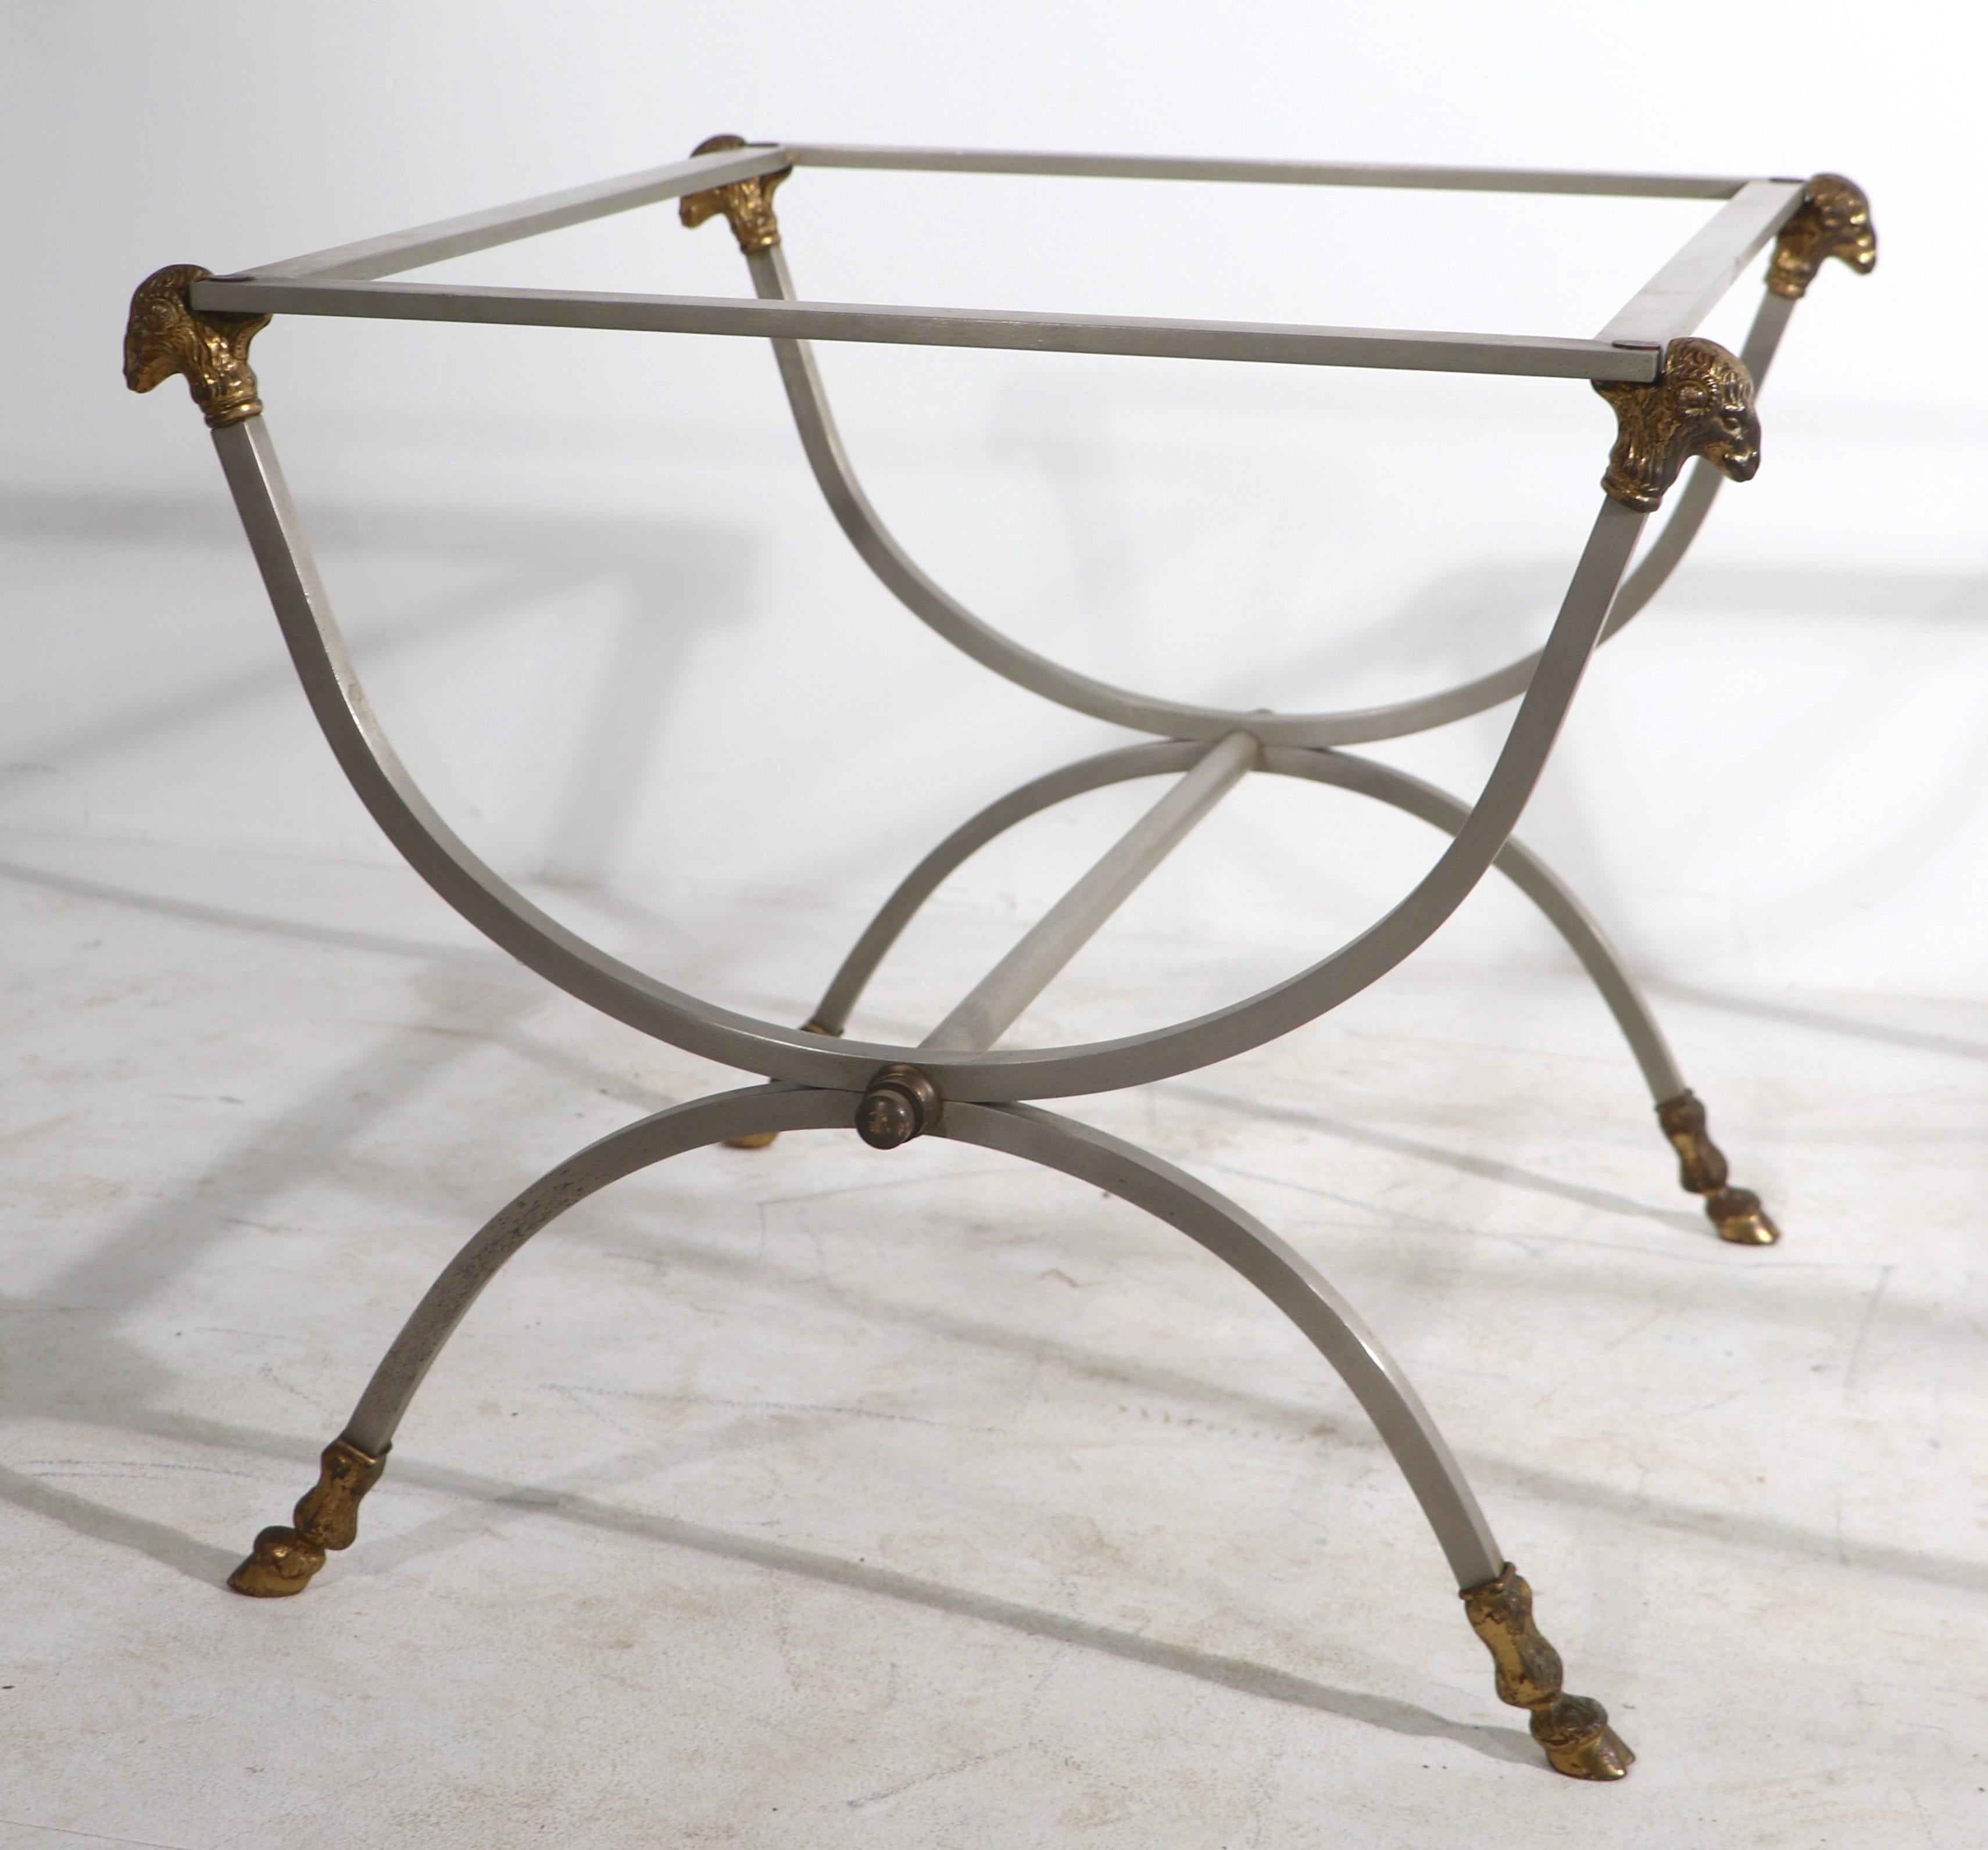 Hollywood Regency Pr. Neo Classical Steel and Brass Tables in the Style of Maison Jensen